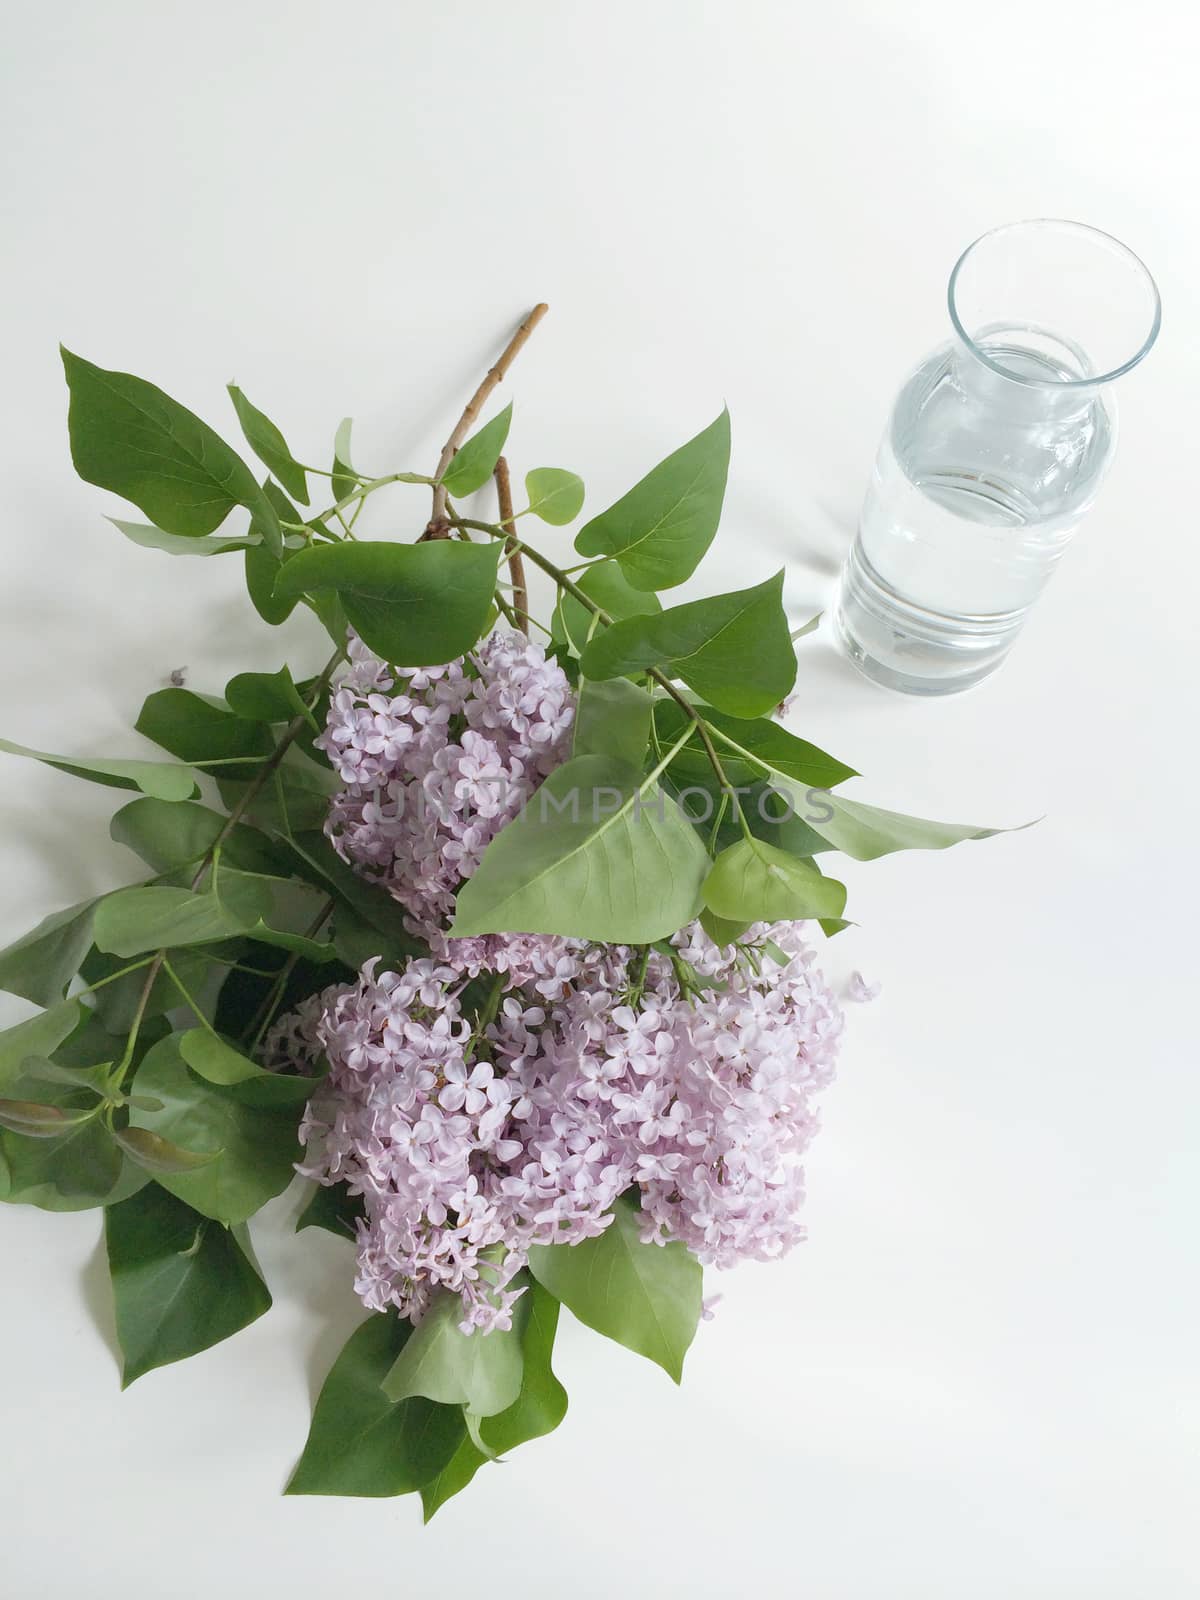 Lilac branches and water glass vase